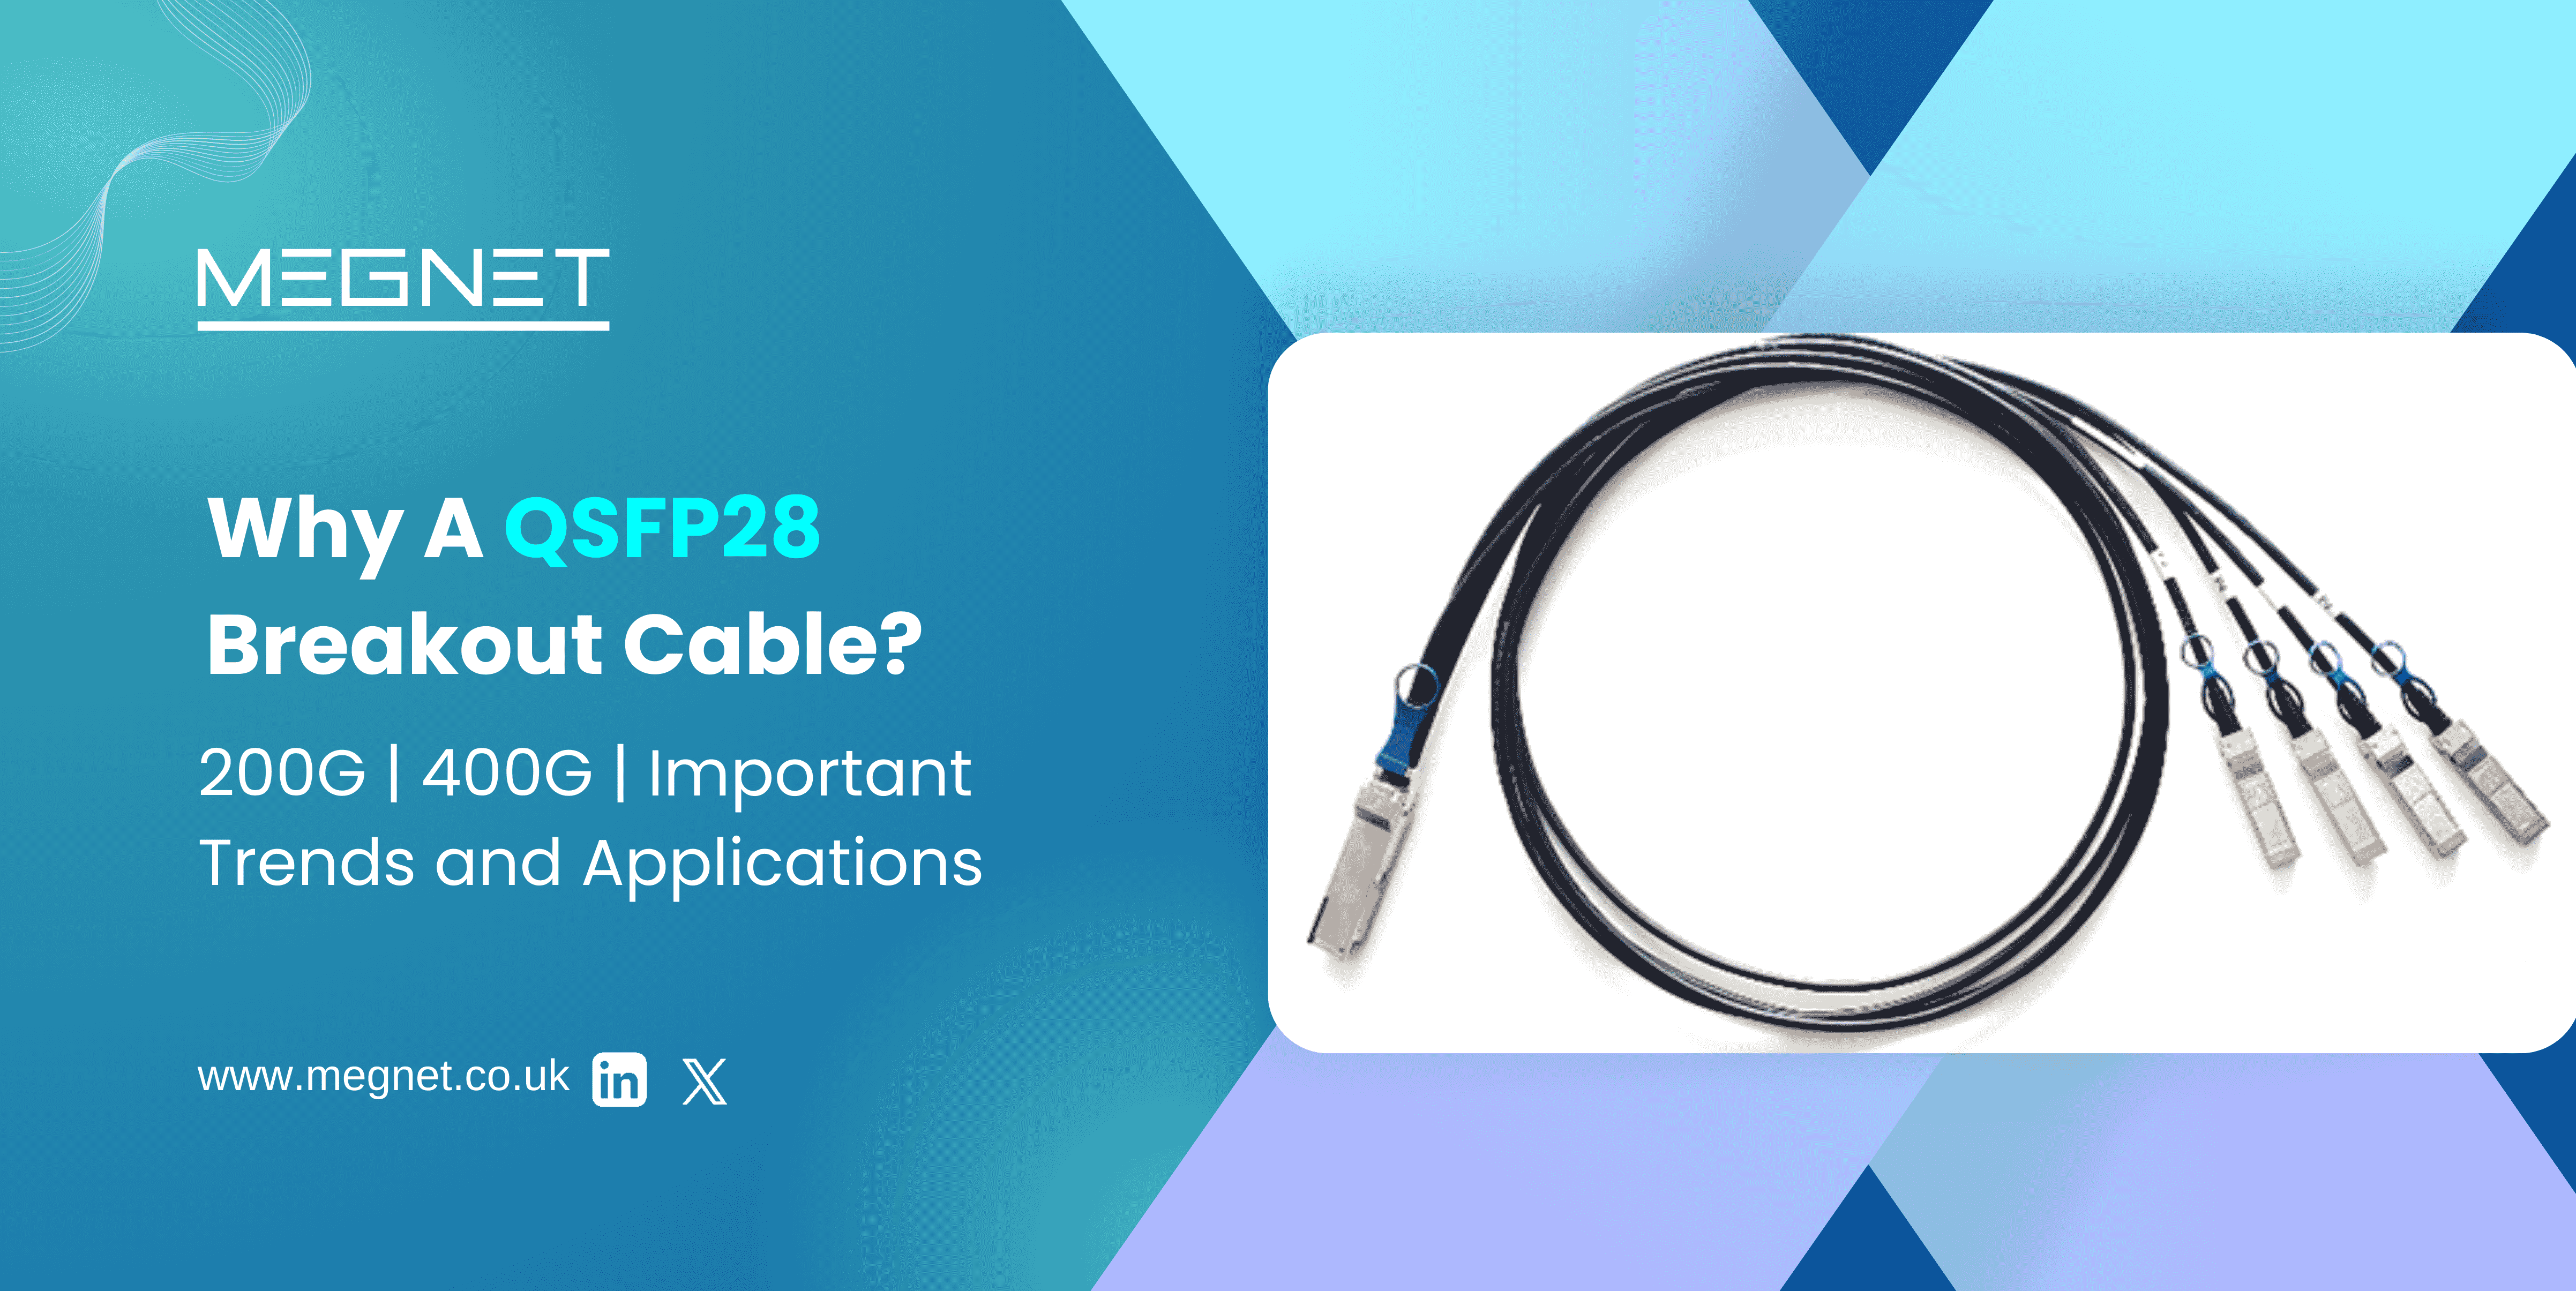 Why A QSFP28 Breakout Cable